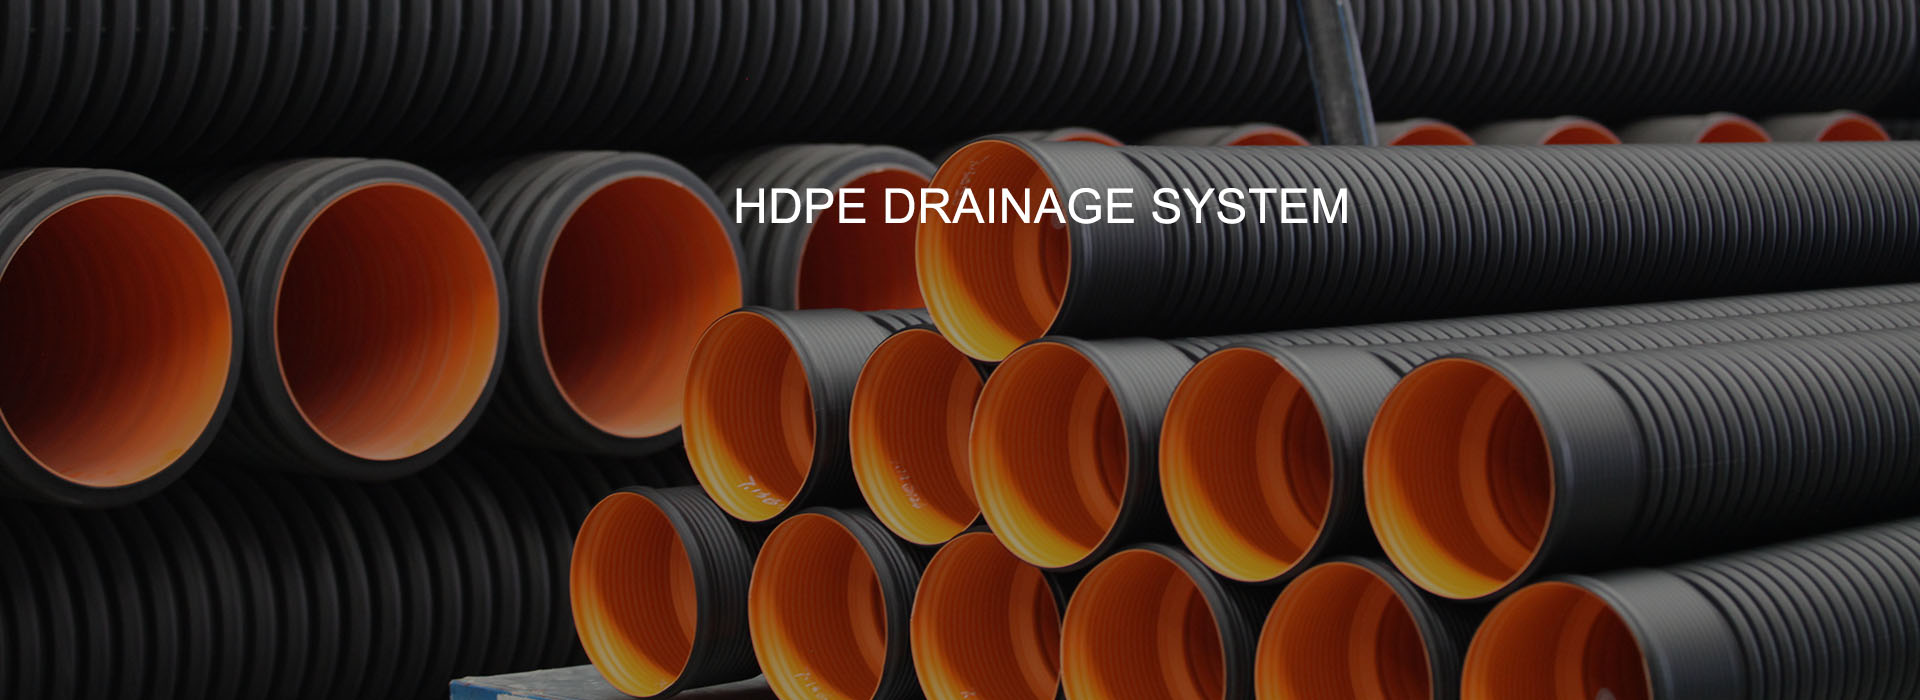 HDPE drainage system